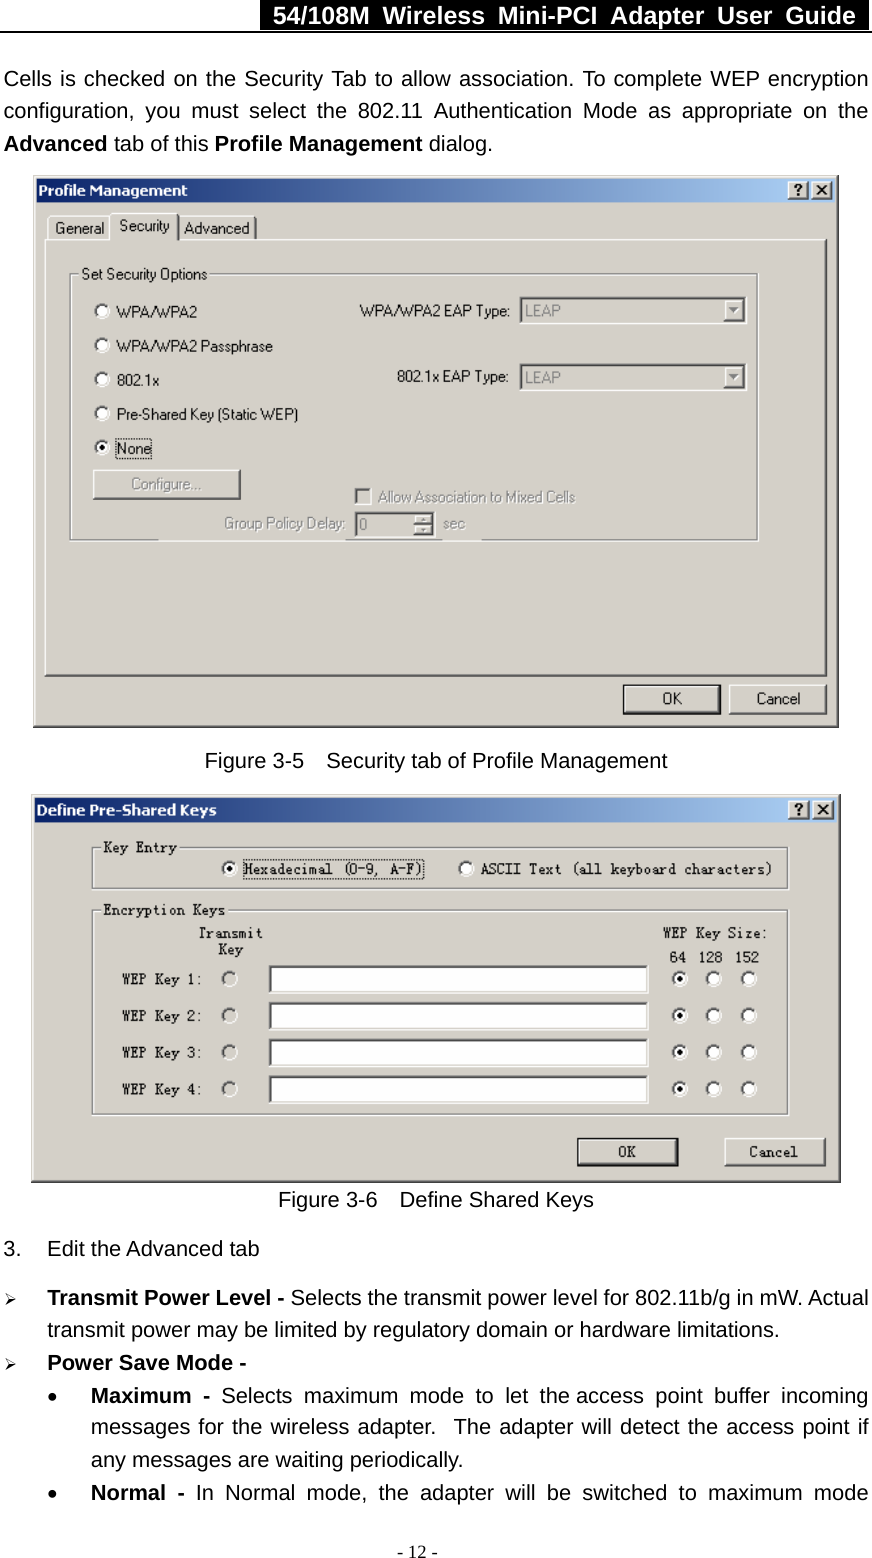   54/108M Wireless Mini-PCI Adapter User Guide  - 12 - Cells is checked on the Security Tab to allow association. To complete WEP encryption configuration, you must select the 802.11 Authentication Mode as appropriate on the Advanced tab of this Profile Management dialog.  Figure 3-5    Security tab of Profile Management  Figure 3-6    Define Shared Keys 3.  Edit the Advanced tab ¾ Transmit Power Level - Selects the transmit power level for 802.11b/g in mW. Actual transmit power may be limited by regulatory domain or hardware limitations. ¾ Power Save Mode - • Maximum - Selects maximum mode to let the access point buffer incoming messages for the wireless adapter.  The adapter will detect the access point if any messages are waiting periodically. • Normal - In Normal mode, the adapter will be switched to maximum mode 